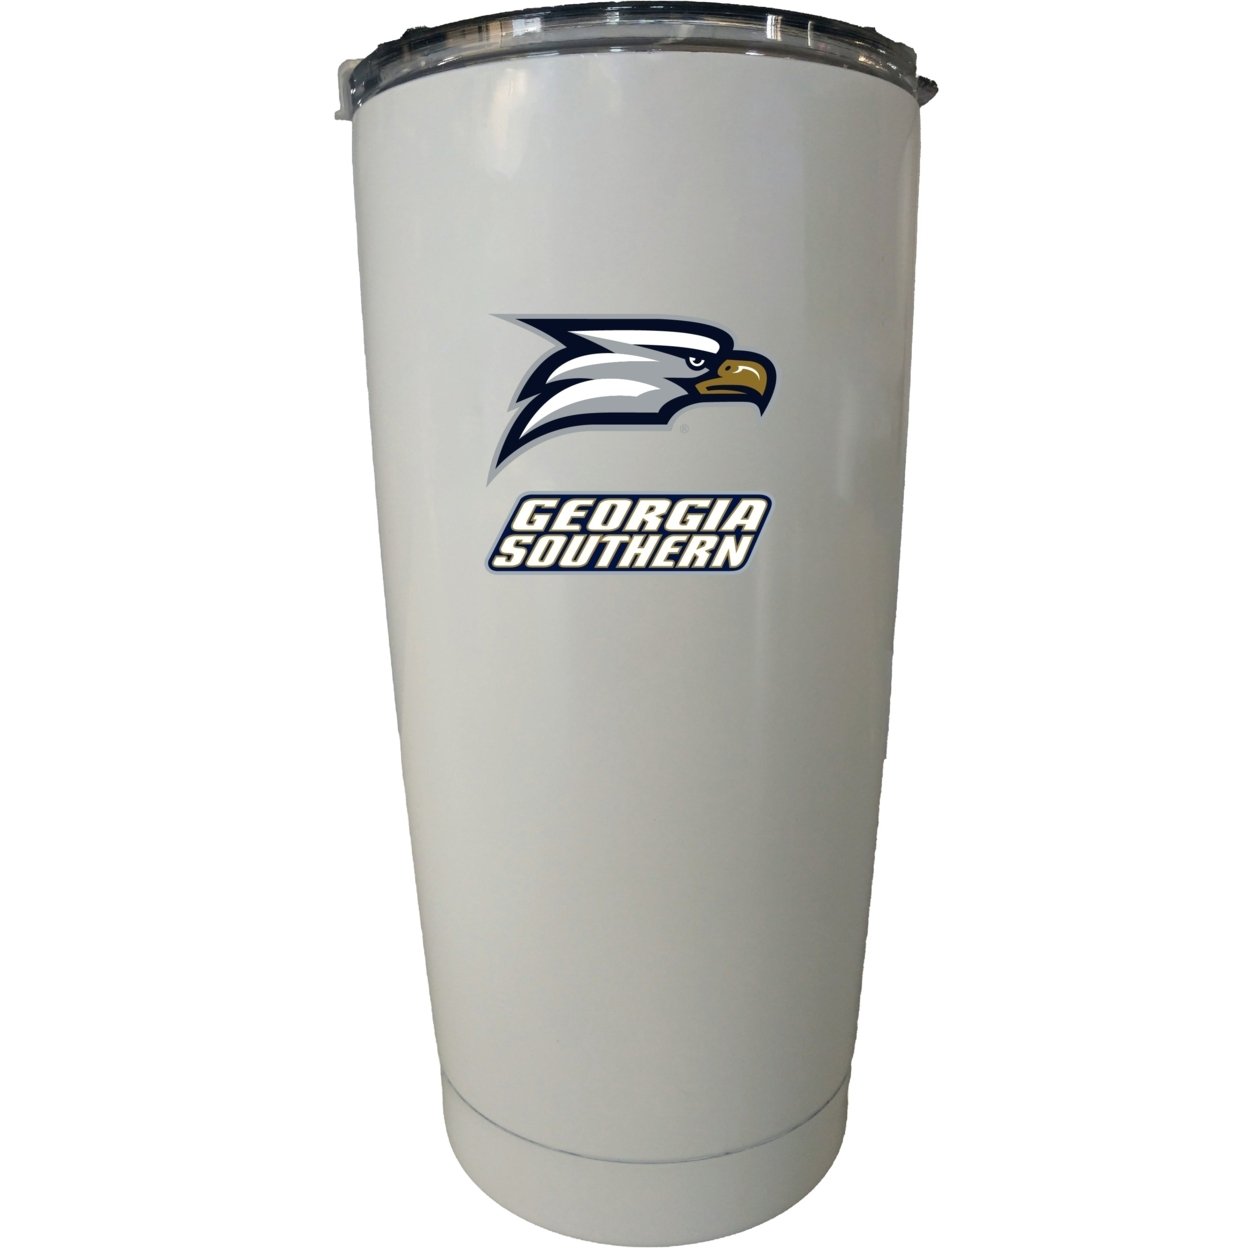 Georgia Southern University Choose Your Color Insulated Stainless Steel Tumbler Choose Your Color.